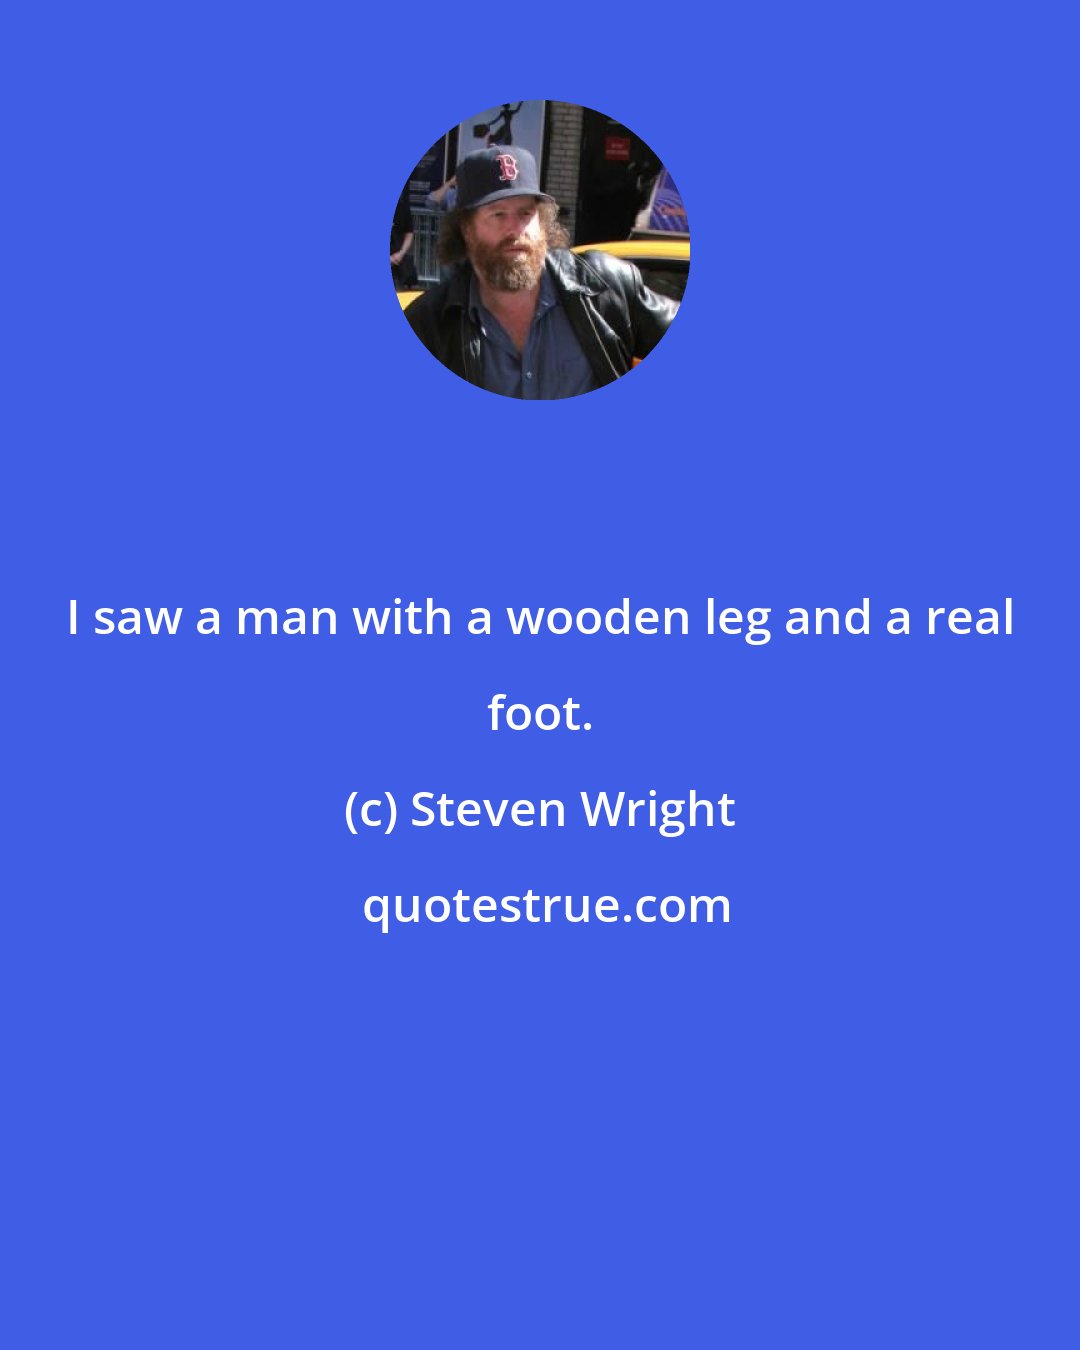 Steven Wright: I saw a man with a wooden leg and a real foot.